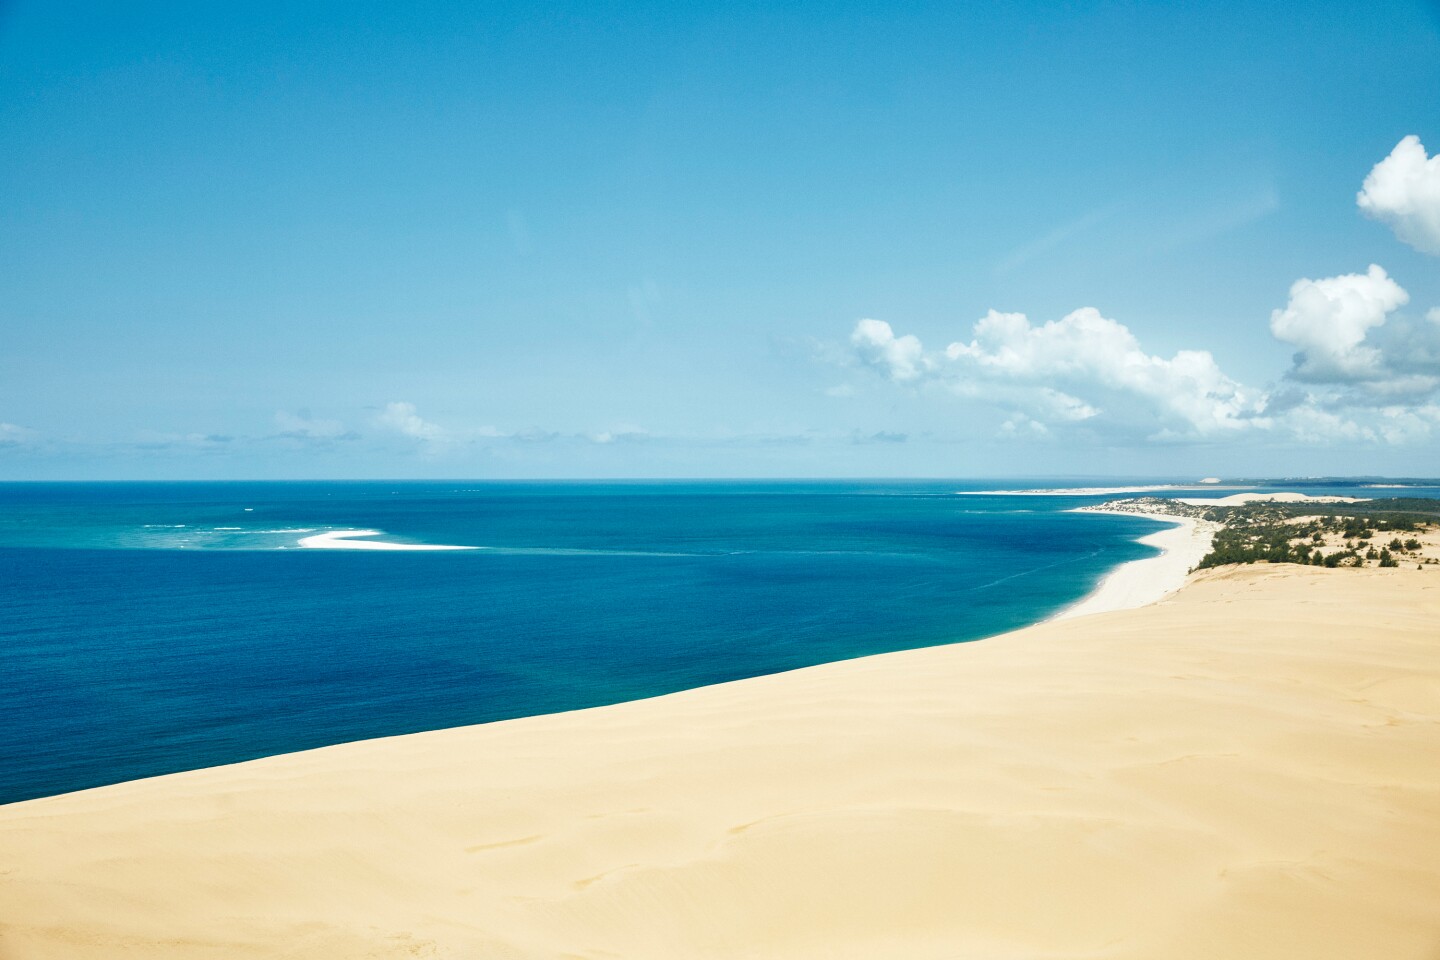 <h2>4. Mozambique</h2> <p>Calling all divers: Is Mozambique on your travel bucket list? If it’s not, it should be. Mozambique sits on the west coast of Africa, sharing borders with South Africa, Zimbabwe, Zambia, Malawi, and Tanzania. Its 1,550 miles of coastline spoil travelers with white-sand beaches and the mesmerizing blues of the Indian Ocean, which can be appreciated from off-shore islands Bazaruto Island, Quirimbas Island, and Benguerra Island. One of the country’s best diving spots is Bazaruto National Park, where kaleidoscopes of coral teem with leopard sharks, manta rays, manatees, and sea turtles.</p> <p>On the mainland, Rhode Island–size Gorongosa National Park is known for its savannas and forests, rich with most of the Big Five. It’s a country primed for a memorable beach and bush vacation, at a fraction of the cost compared to other countries in southern Africa.</p> <h3>Where to stay</h3> <ul>   <li>Book now: <a class="Link" href="https://machangulobeachlodge.com/" rel="noopener">Machangulo Beach Lodge</a></li>  </ul> <p>Visitors to Mozambique can book a stay at <a class="Link" href="https://machangulobeachlodge.com/" rel="noopener">Machangulo Beach Lodge</a>, which offers views over the straits that separate Maputo Bay from the Indian Ocean.</p>